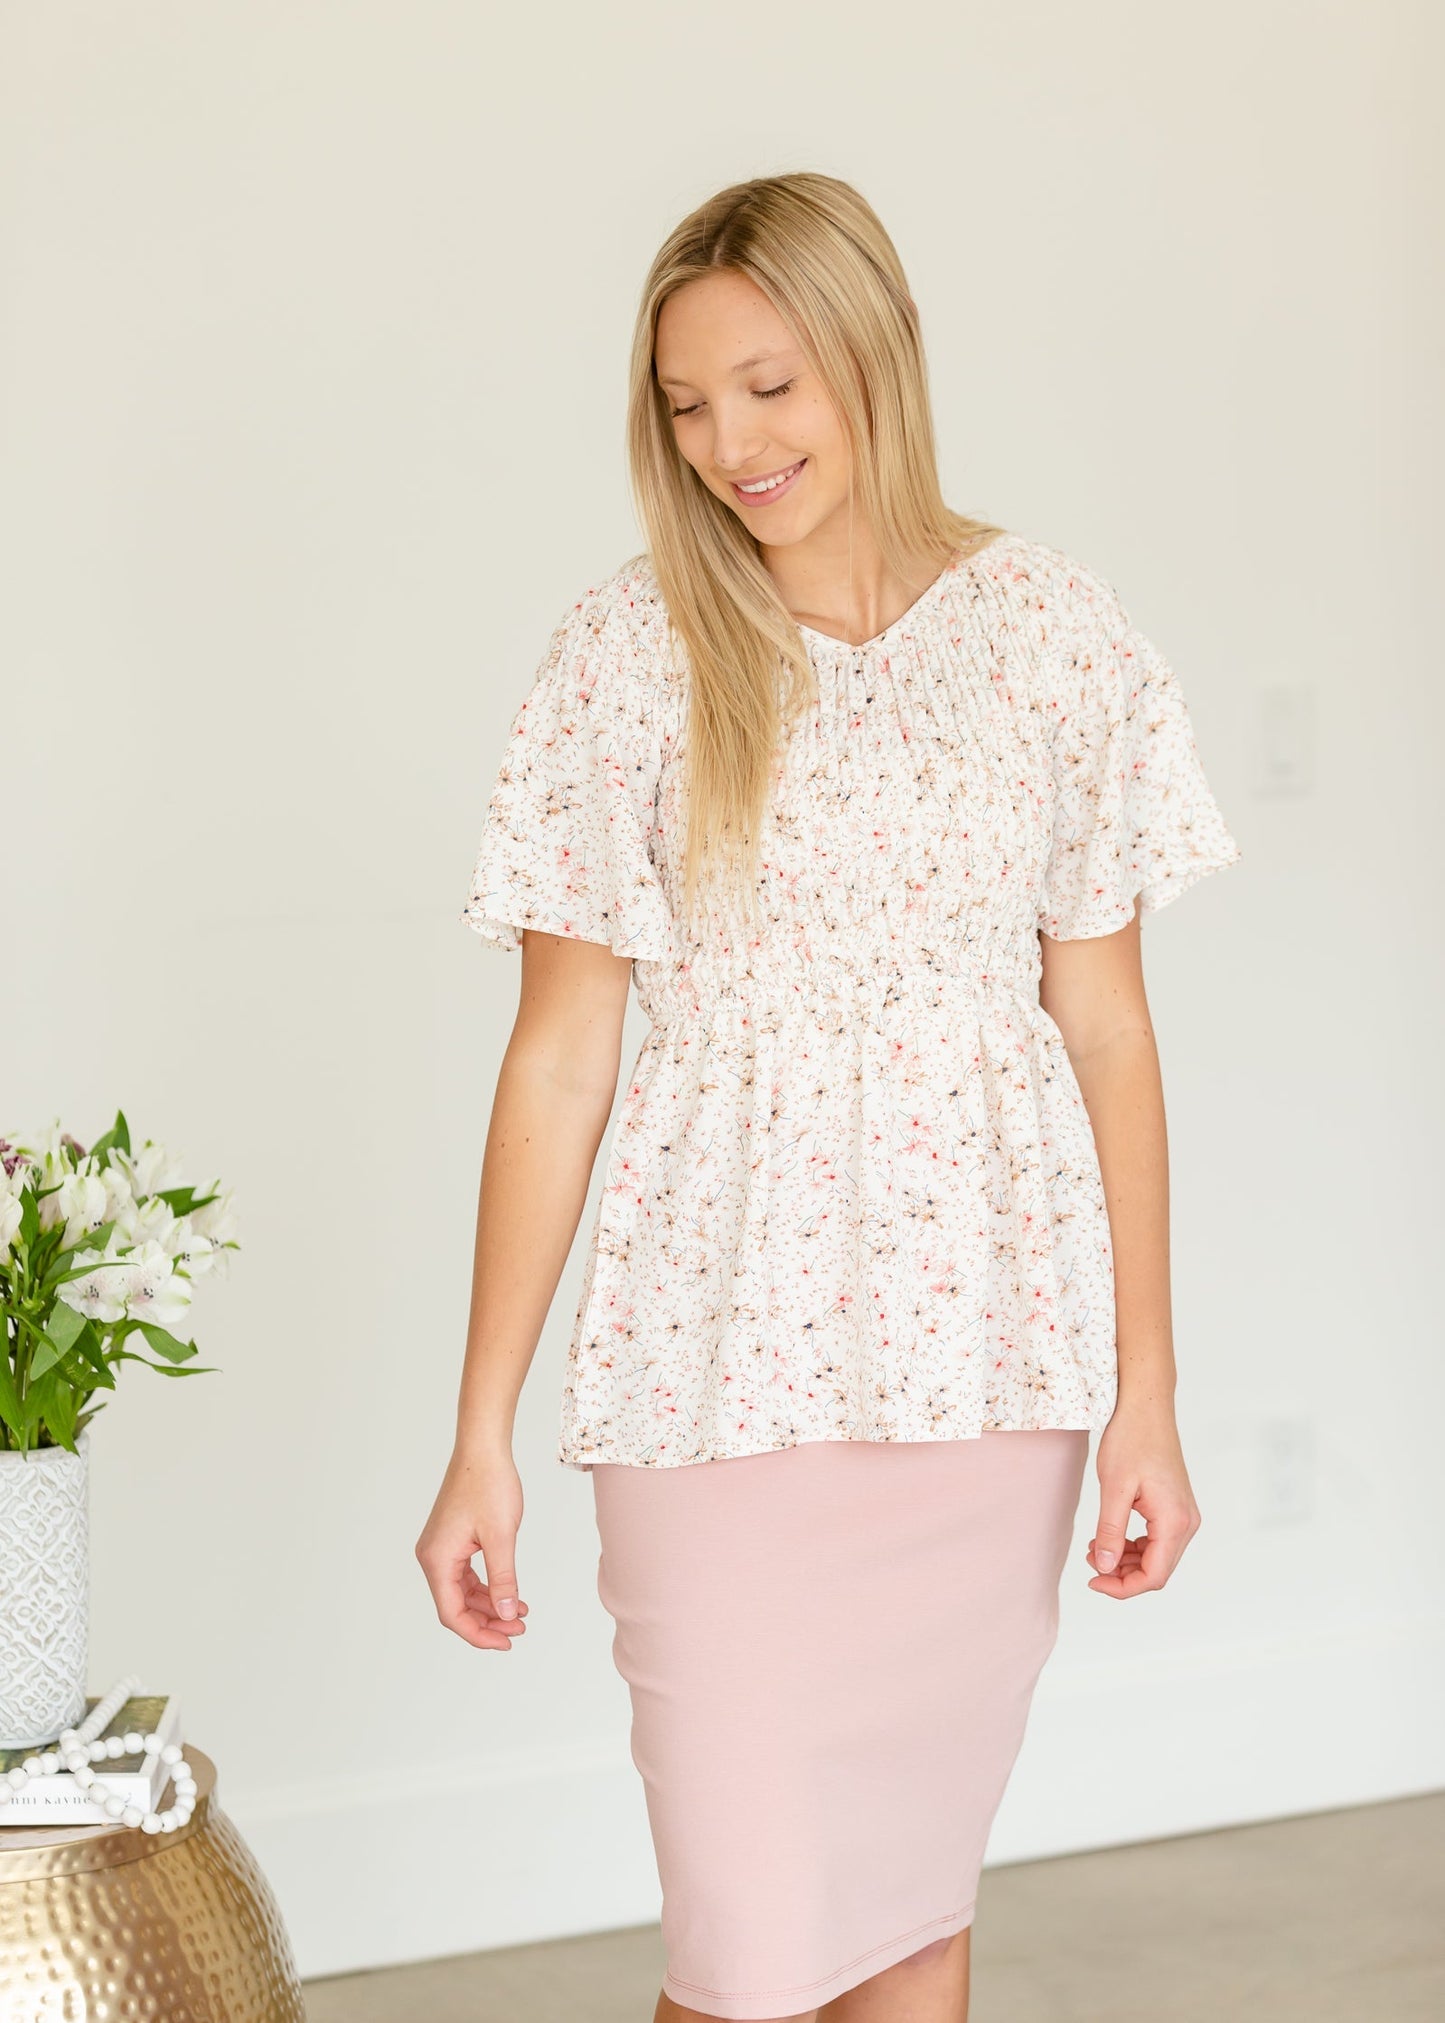 Cream Floral Smocked Top - FINAL SALE Tops